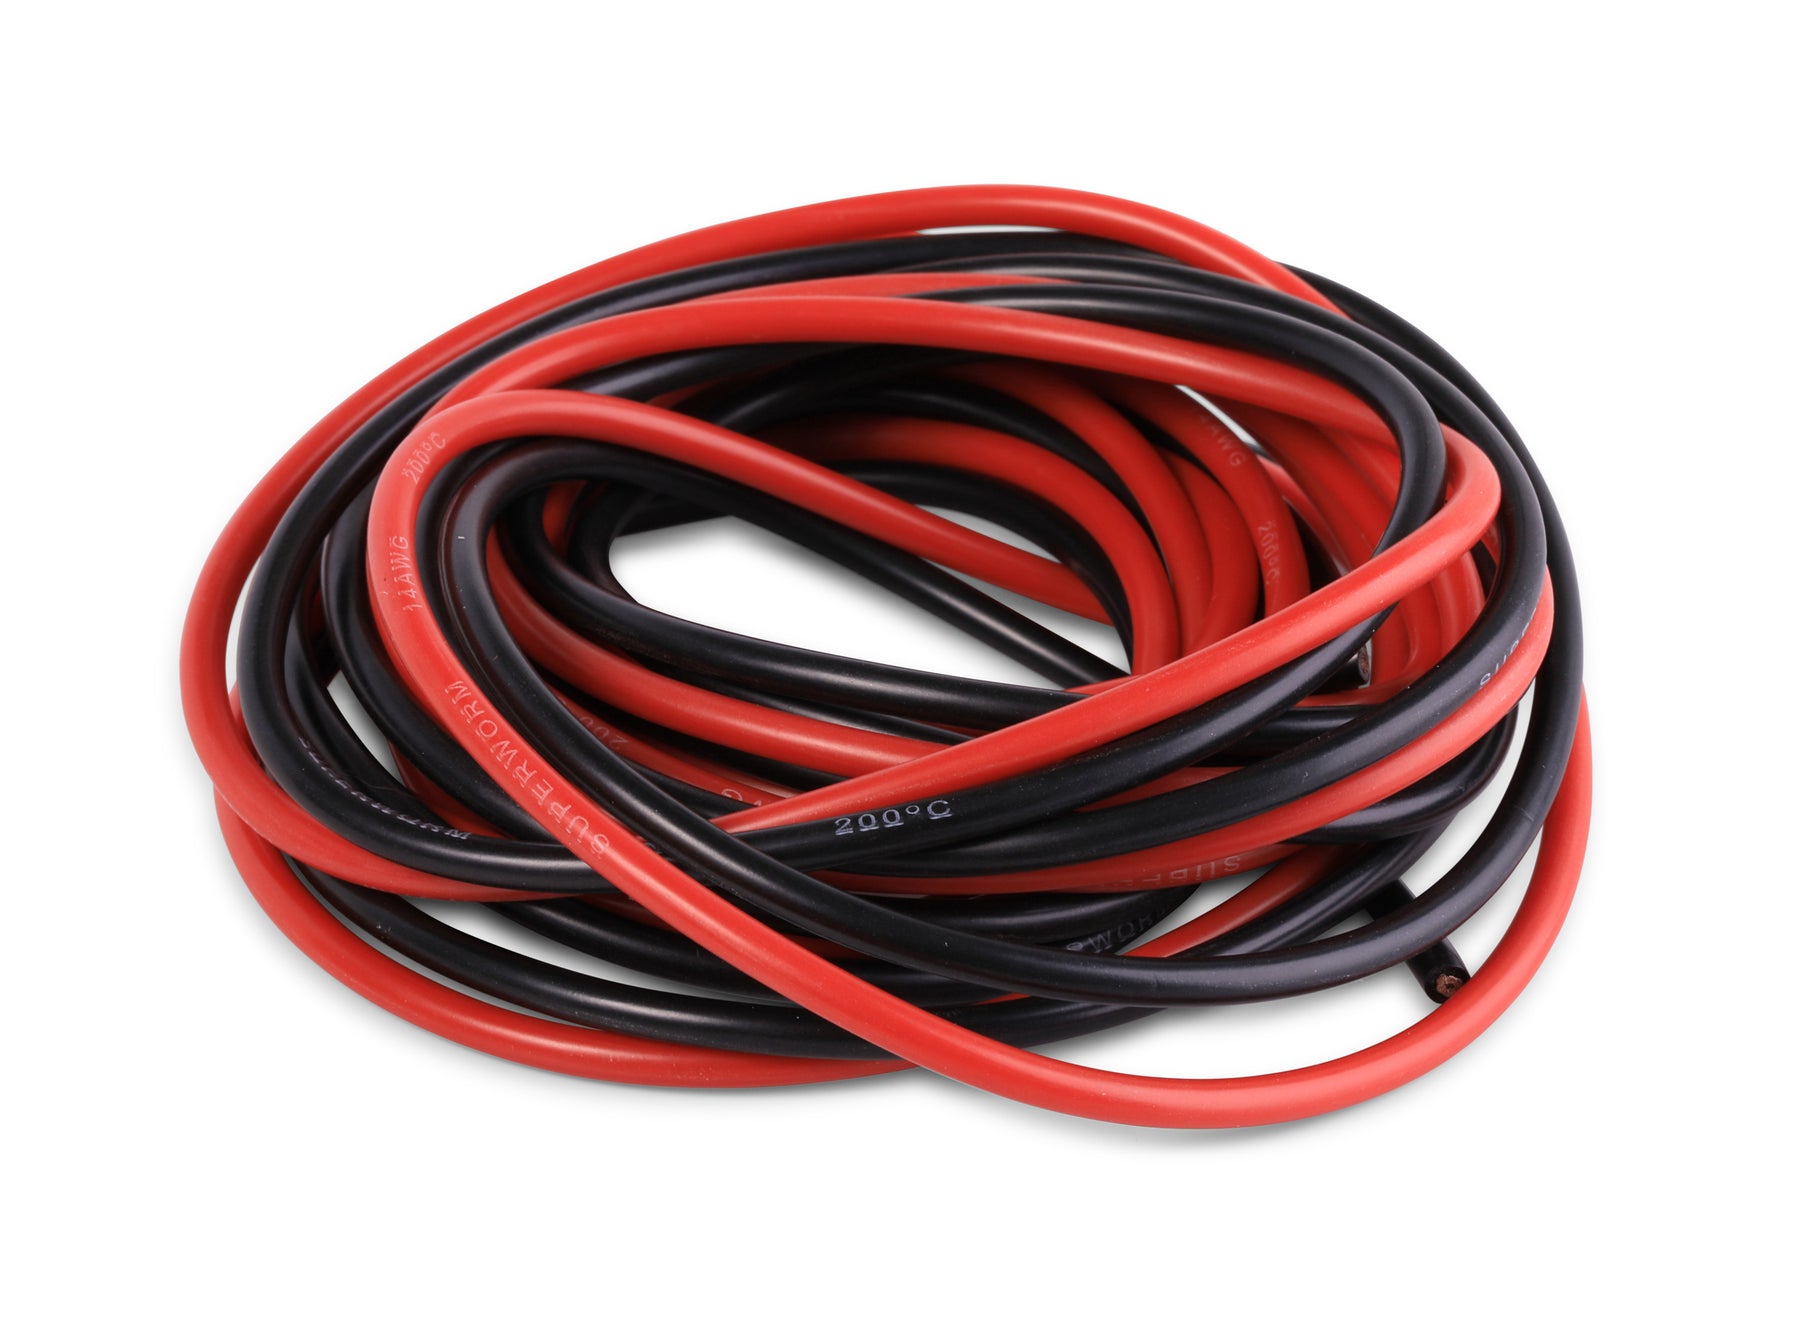 14 gauge silicone wire kit ultra flexible 10 color stranded wire